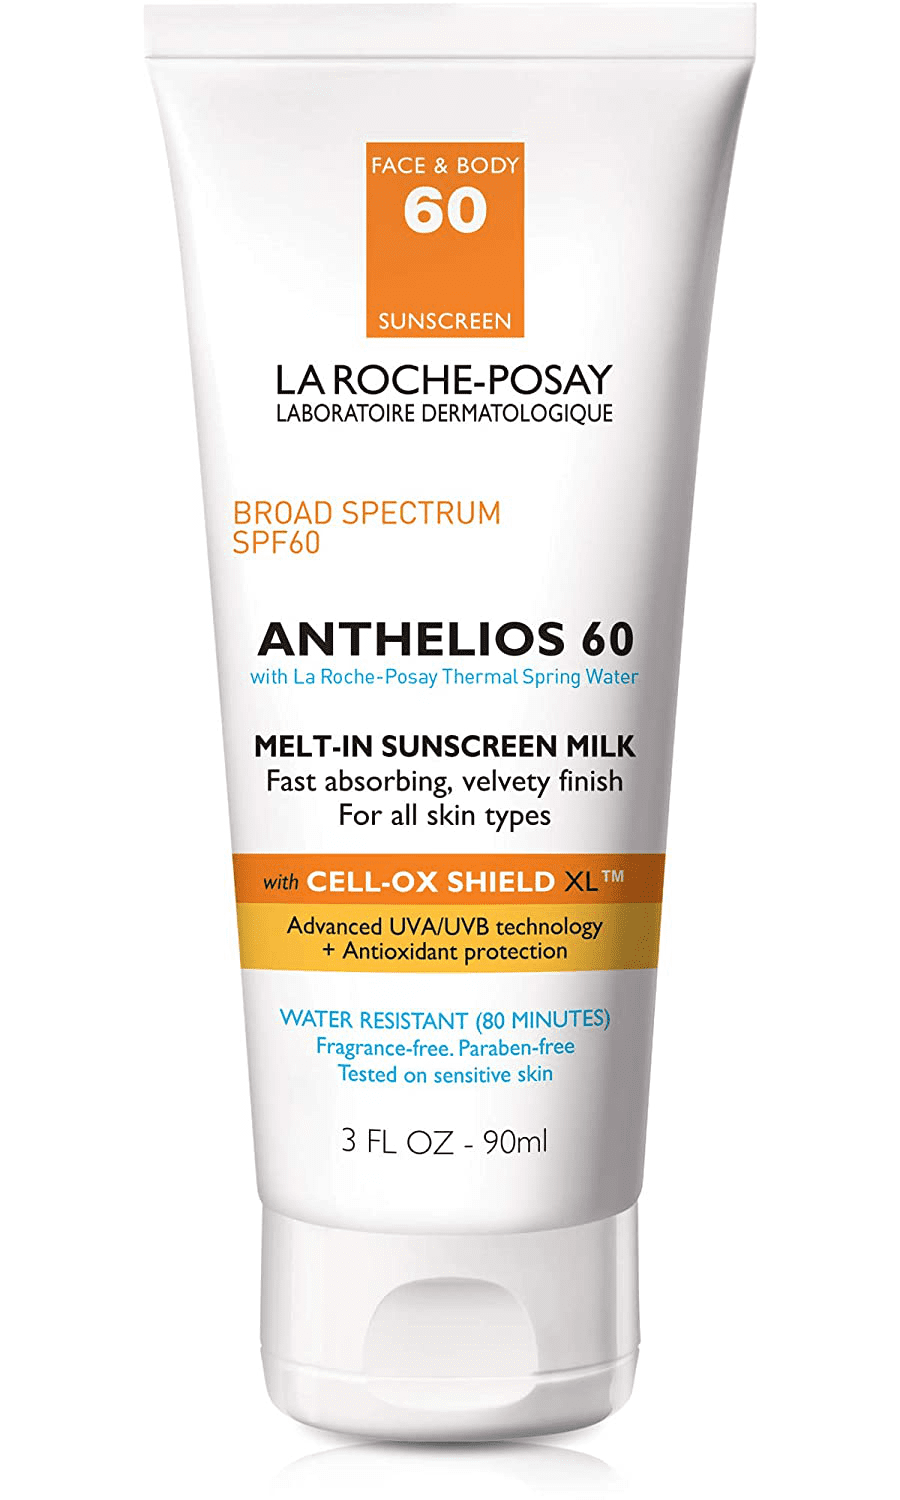 pensum Forholdsvis kryds La Roche-Posay Anthelios Melt-In Sunscreen Milk Body & Face Sunscreen  Lotion Broad Spectrum SPF 60, Oxybenzone & Octinoxate Free, Oil-Free  Sunscreen - Walmart.com